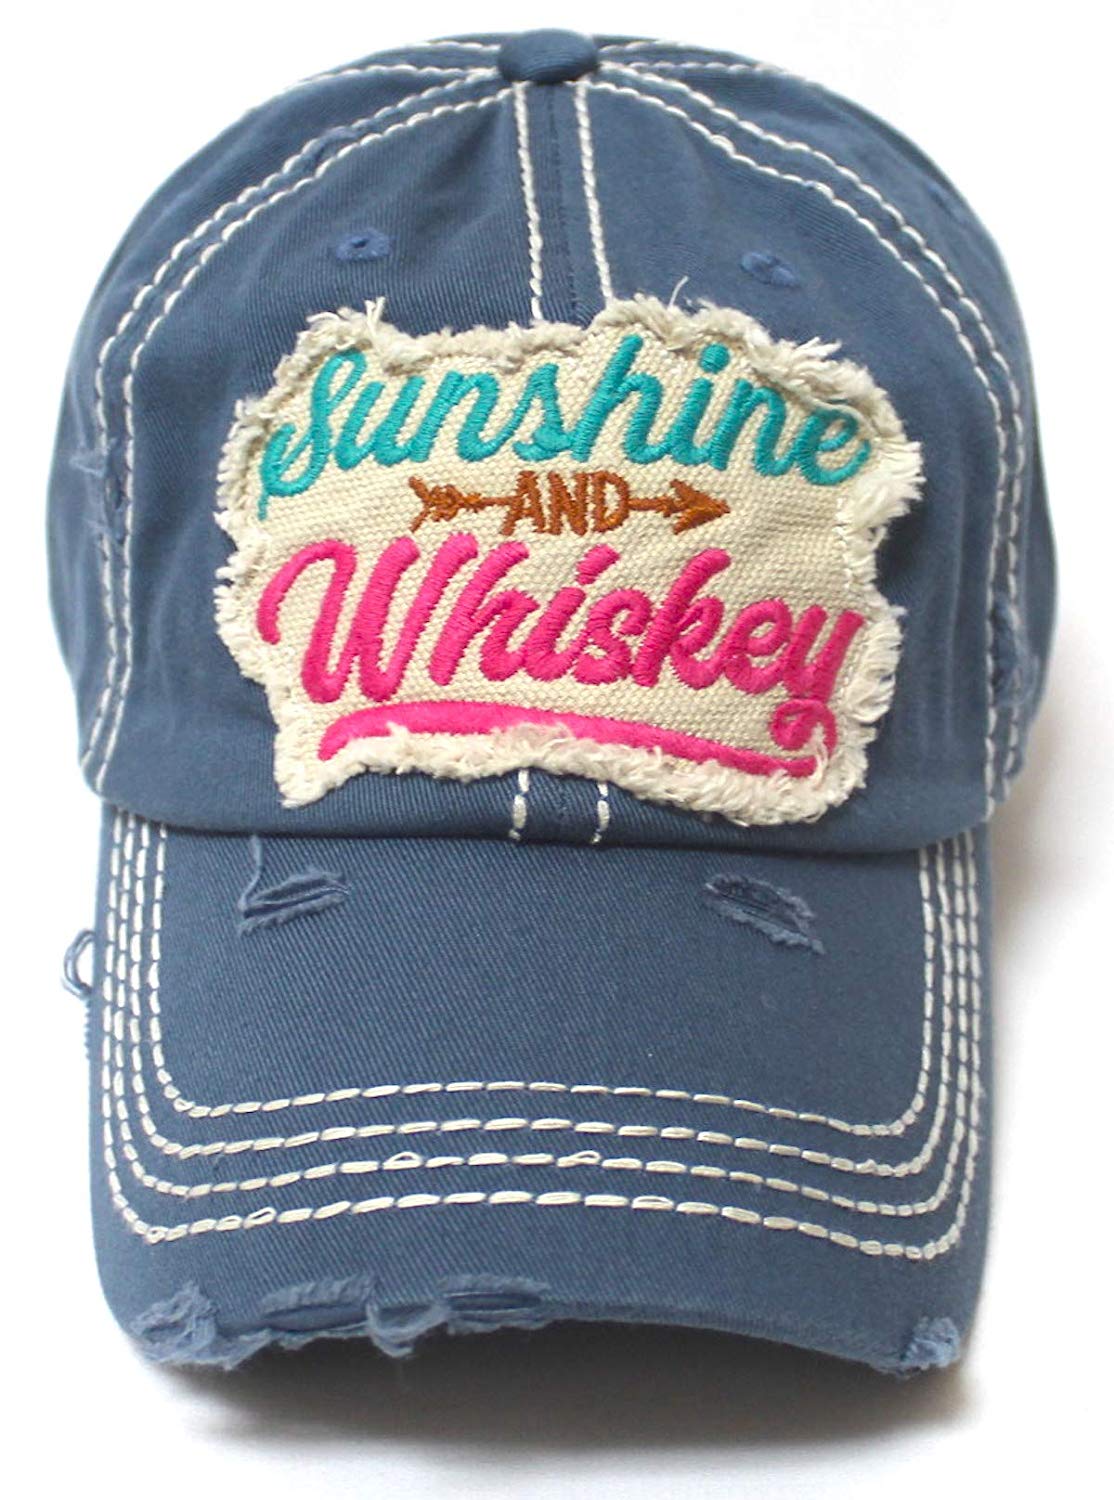 Women's Ballcap Sunshine and Whiskey Tribal Arrow Patch Embroidery Hat, Teal Blue - Caps 'N Vintage 